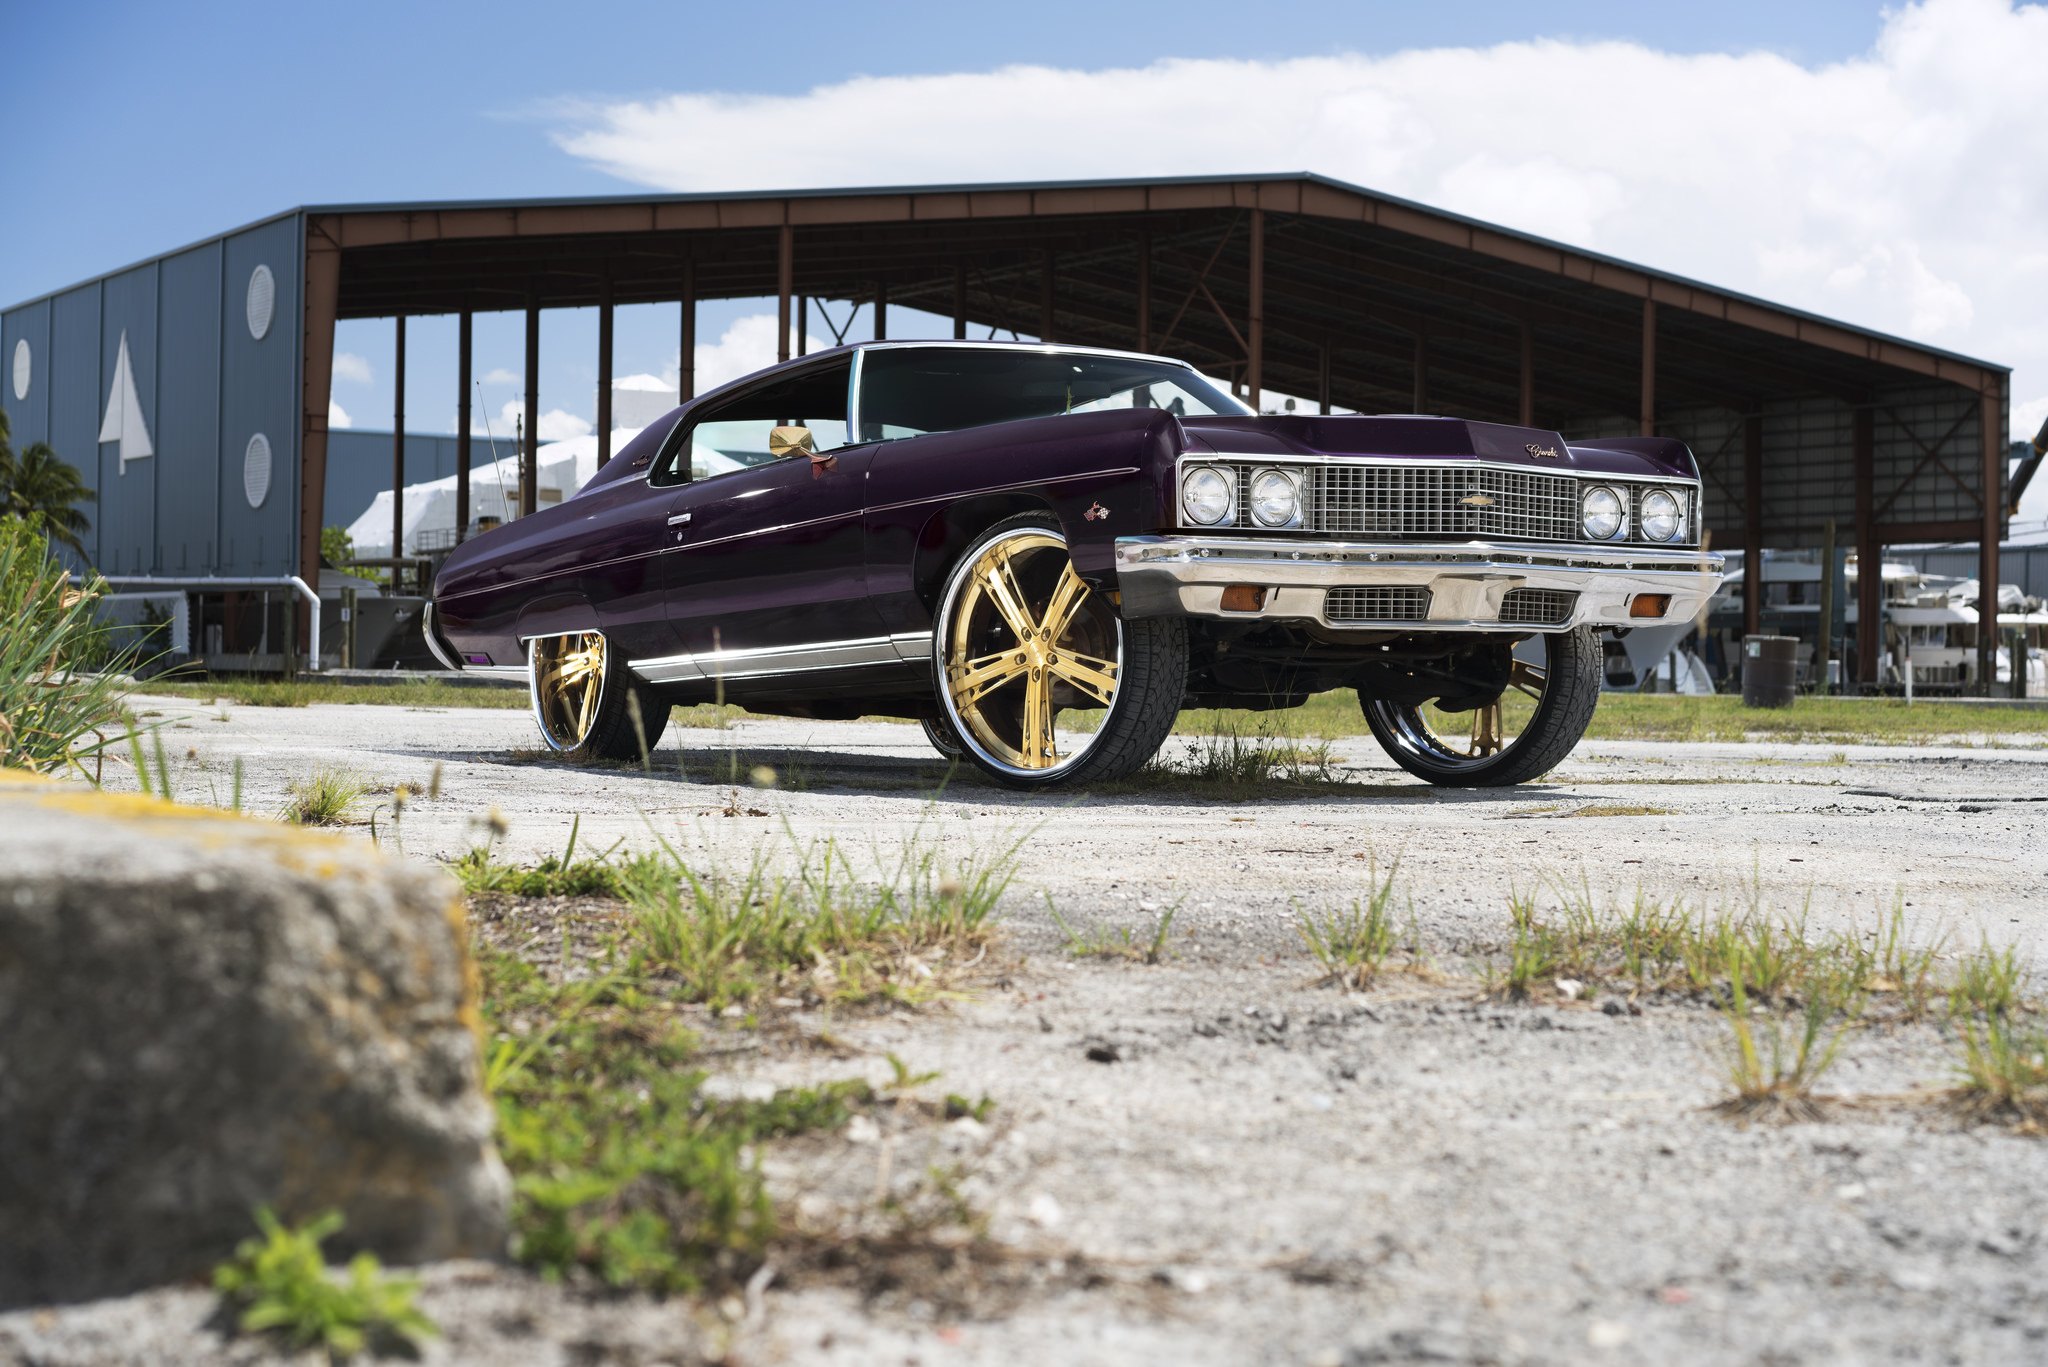 Lifted Purple Chevy Impala on Gold Wheels - Photo by DUB.